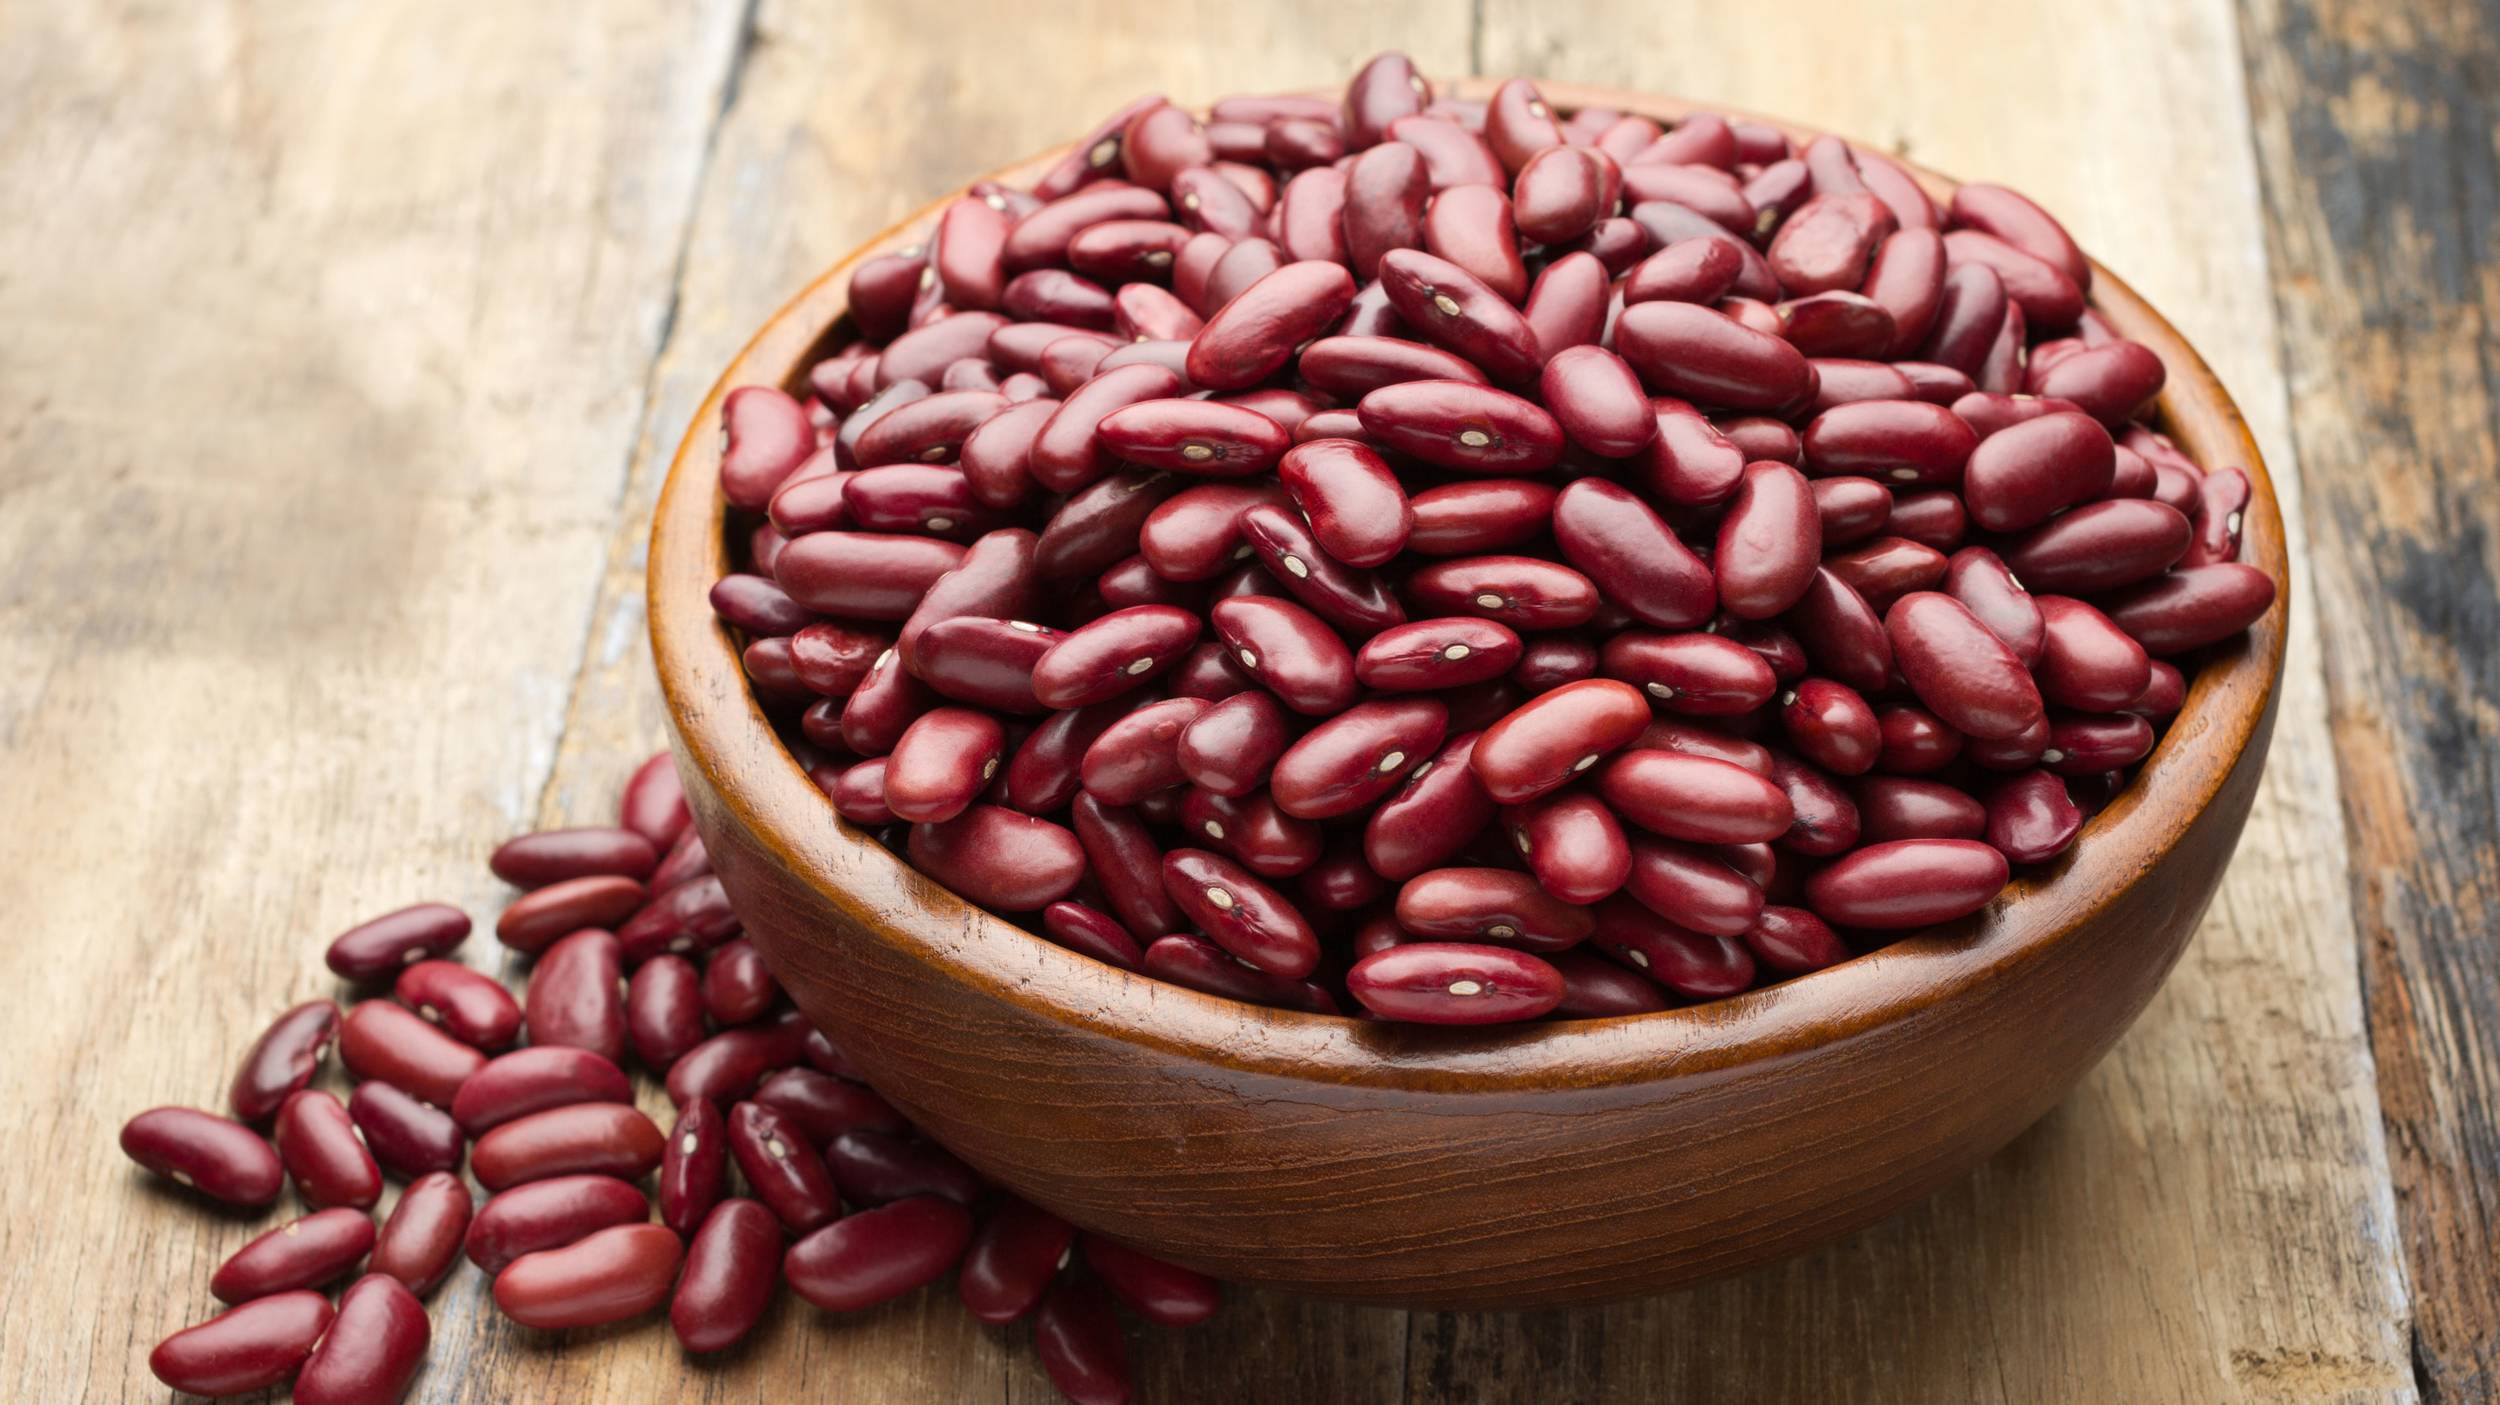 Dark red kidney beans are a good source of plant-based protein and an excellent source of fibre.